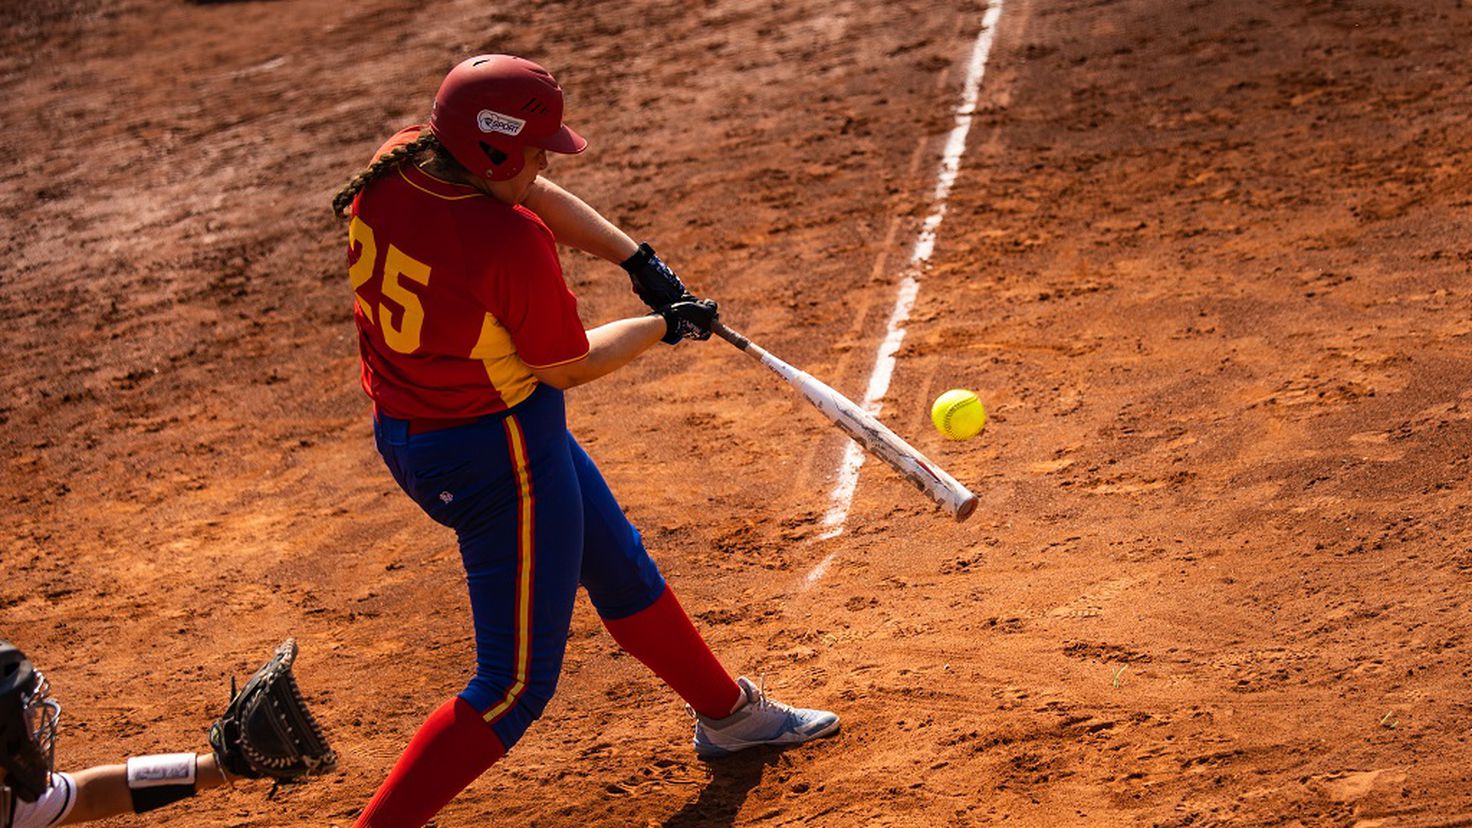 Valencia prepares for the Women's Softball World Cup
